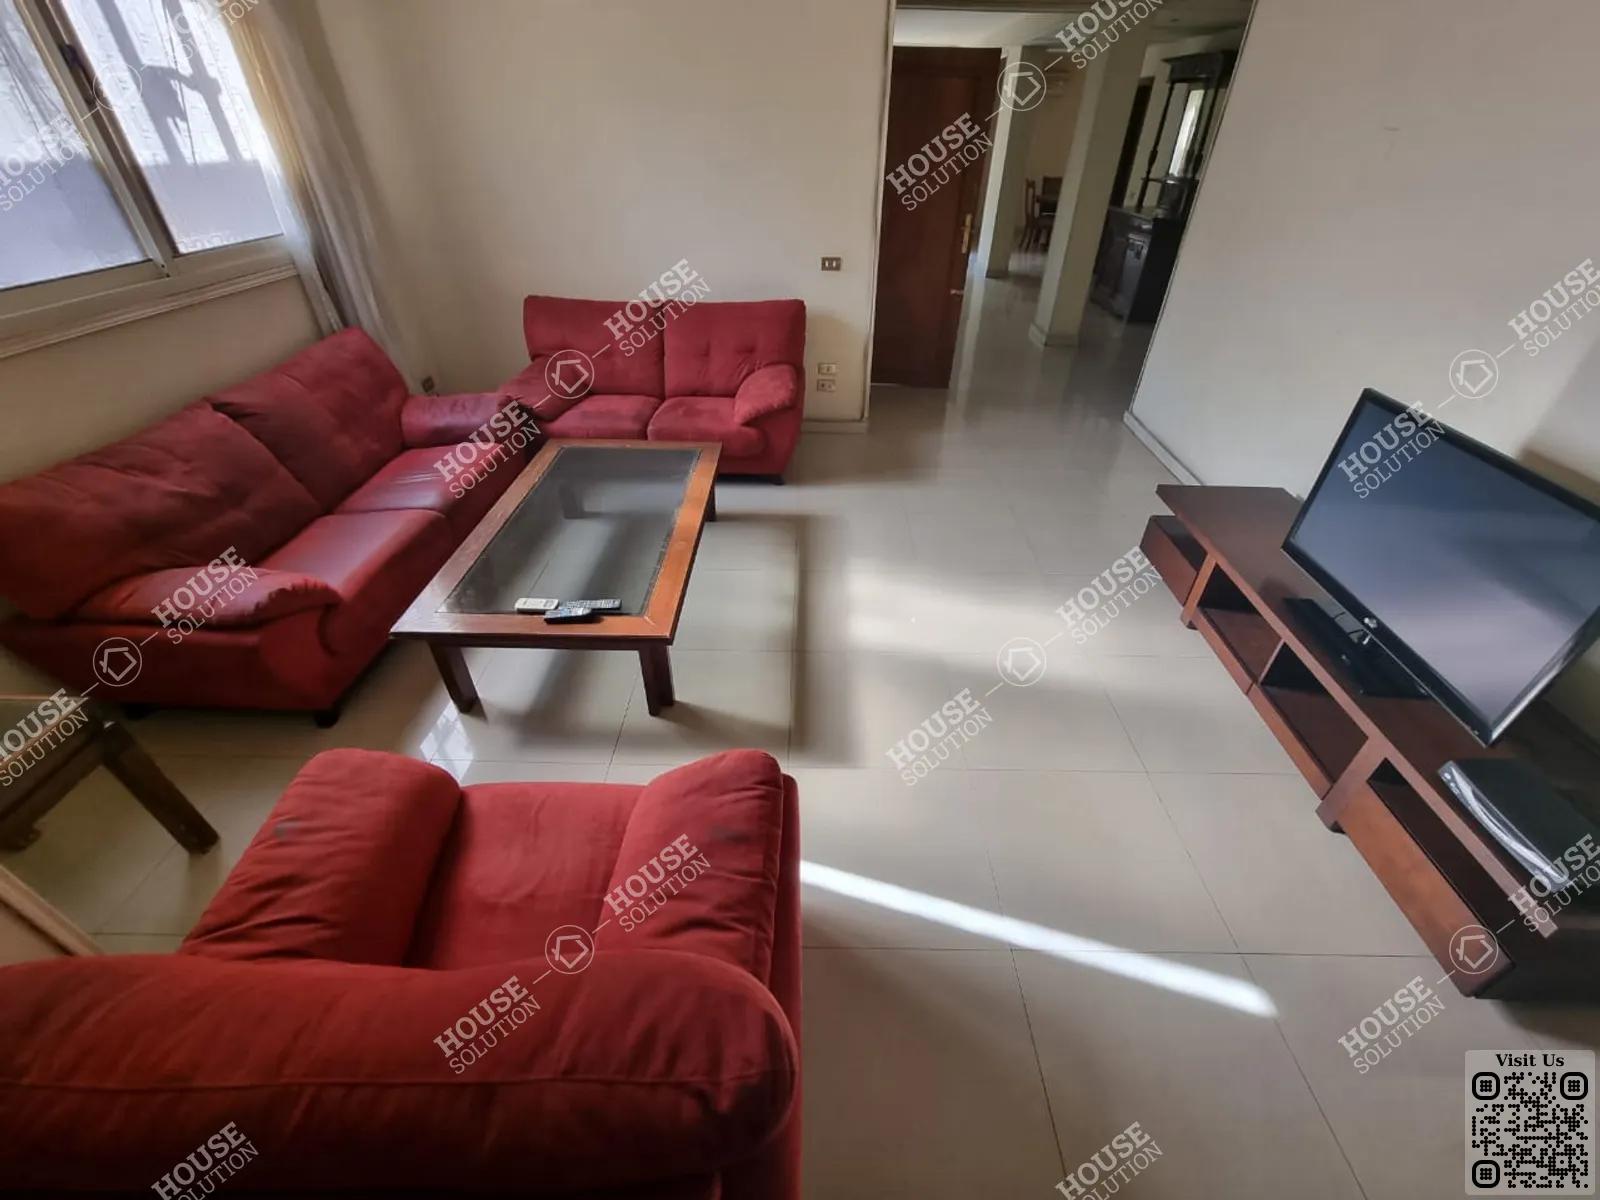 LIVING AREA  @ Apartments For Rent In Maadi Maadi Degla Area: 280 m² consists of 4 Bedrooms 3 Bathrooms Modern furnished 5 stars #5480-1